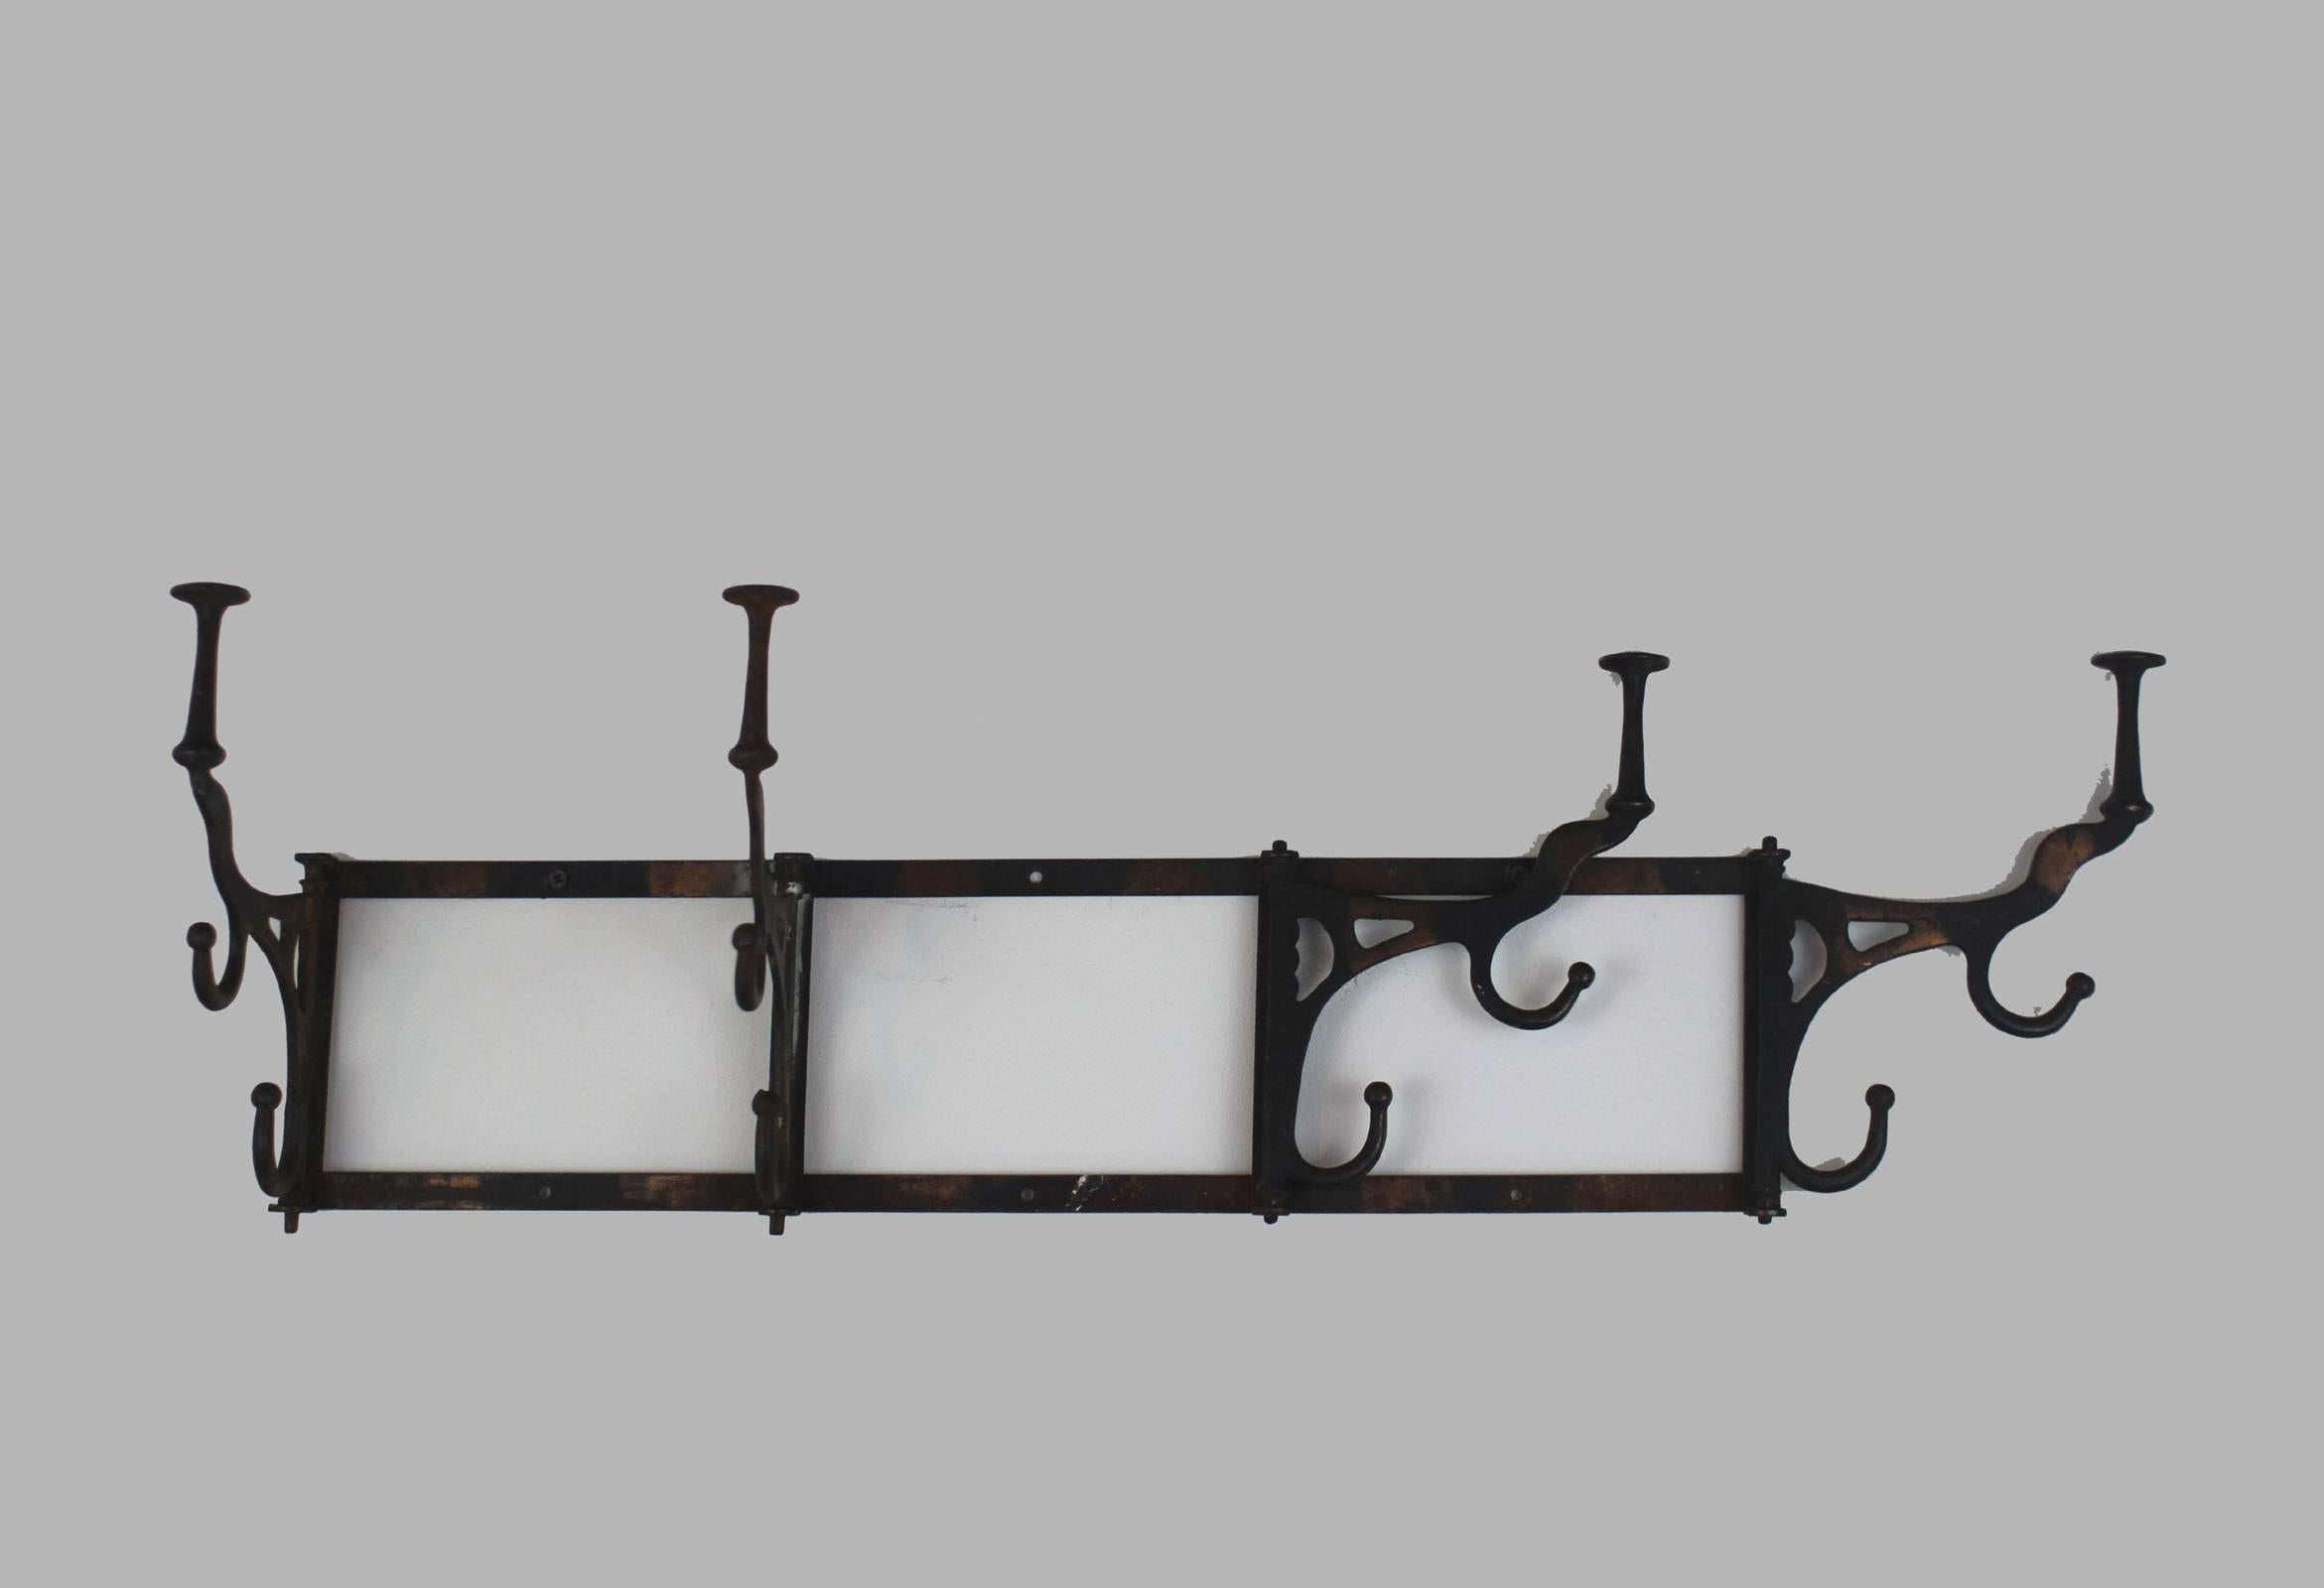 Very good and sturdy wall-mount cast iron rack with four locking swing-arm triple hooks. Would work well for narrow halls or small rooms as the hooks can lay flat when not in use. Iron, circa 1900. Good for coats, hats etc.